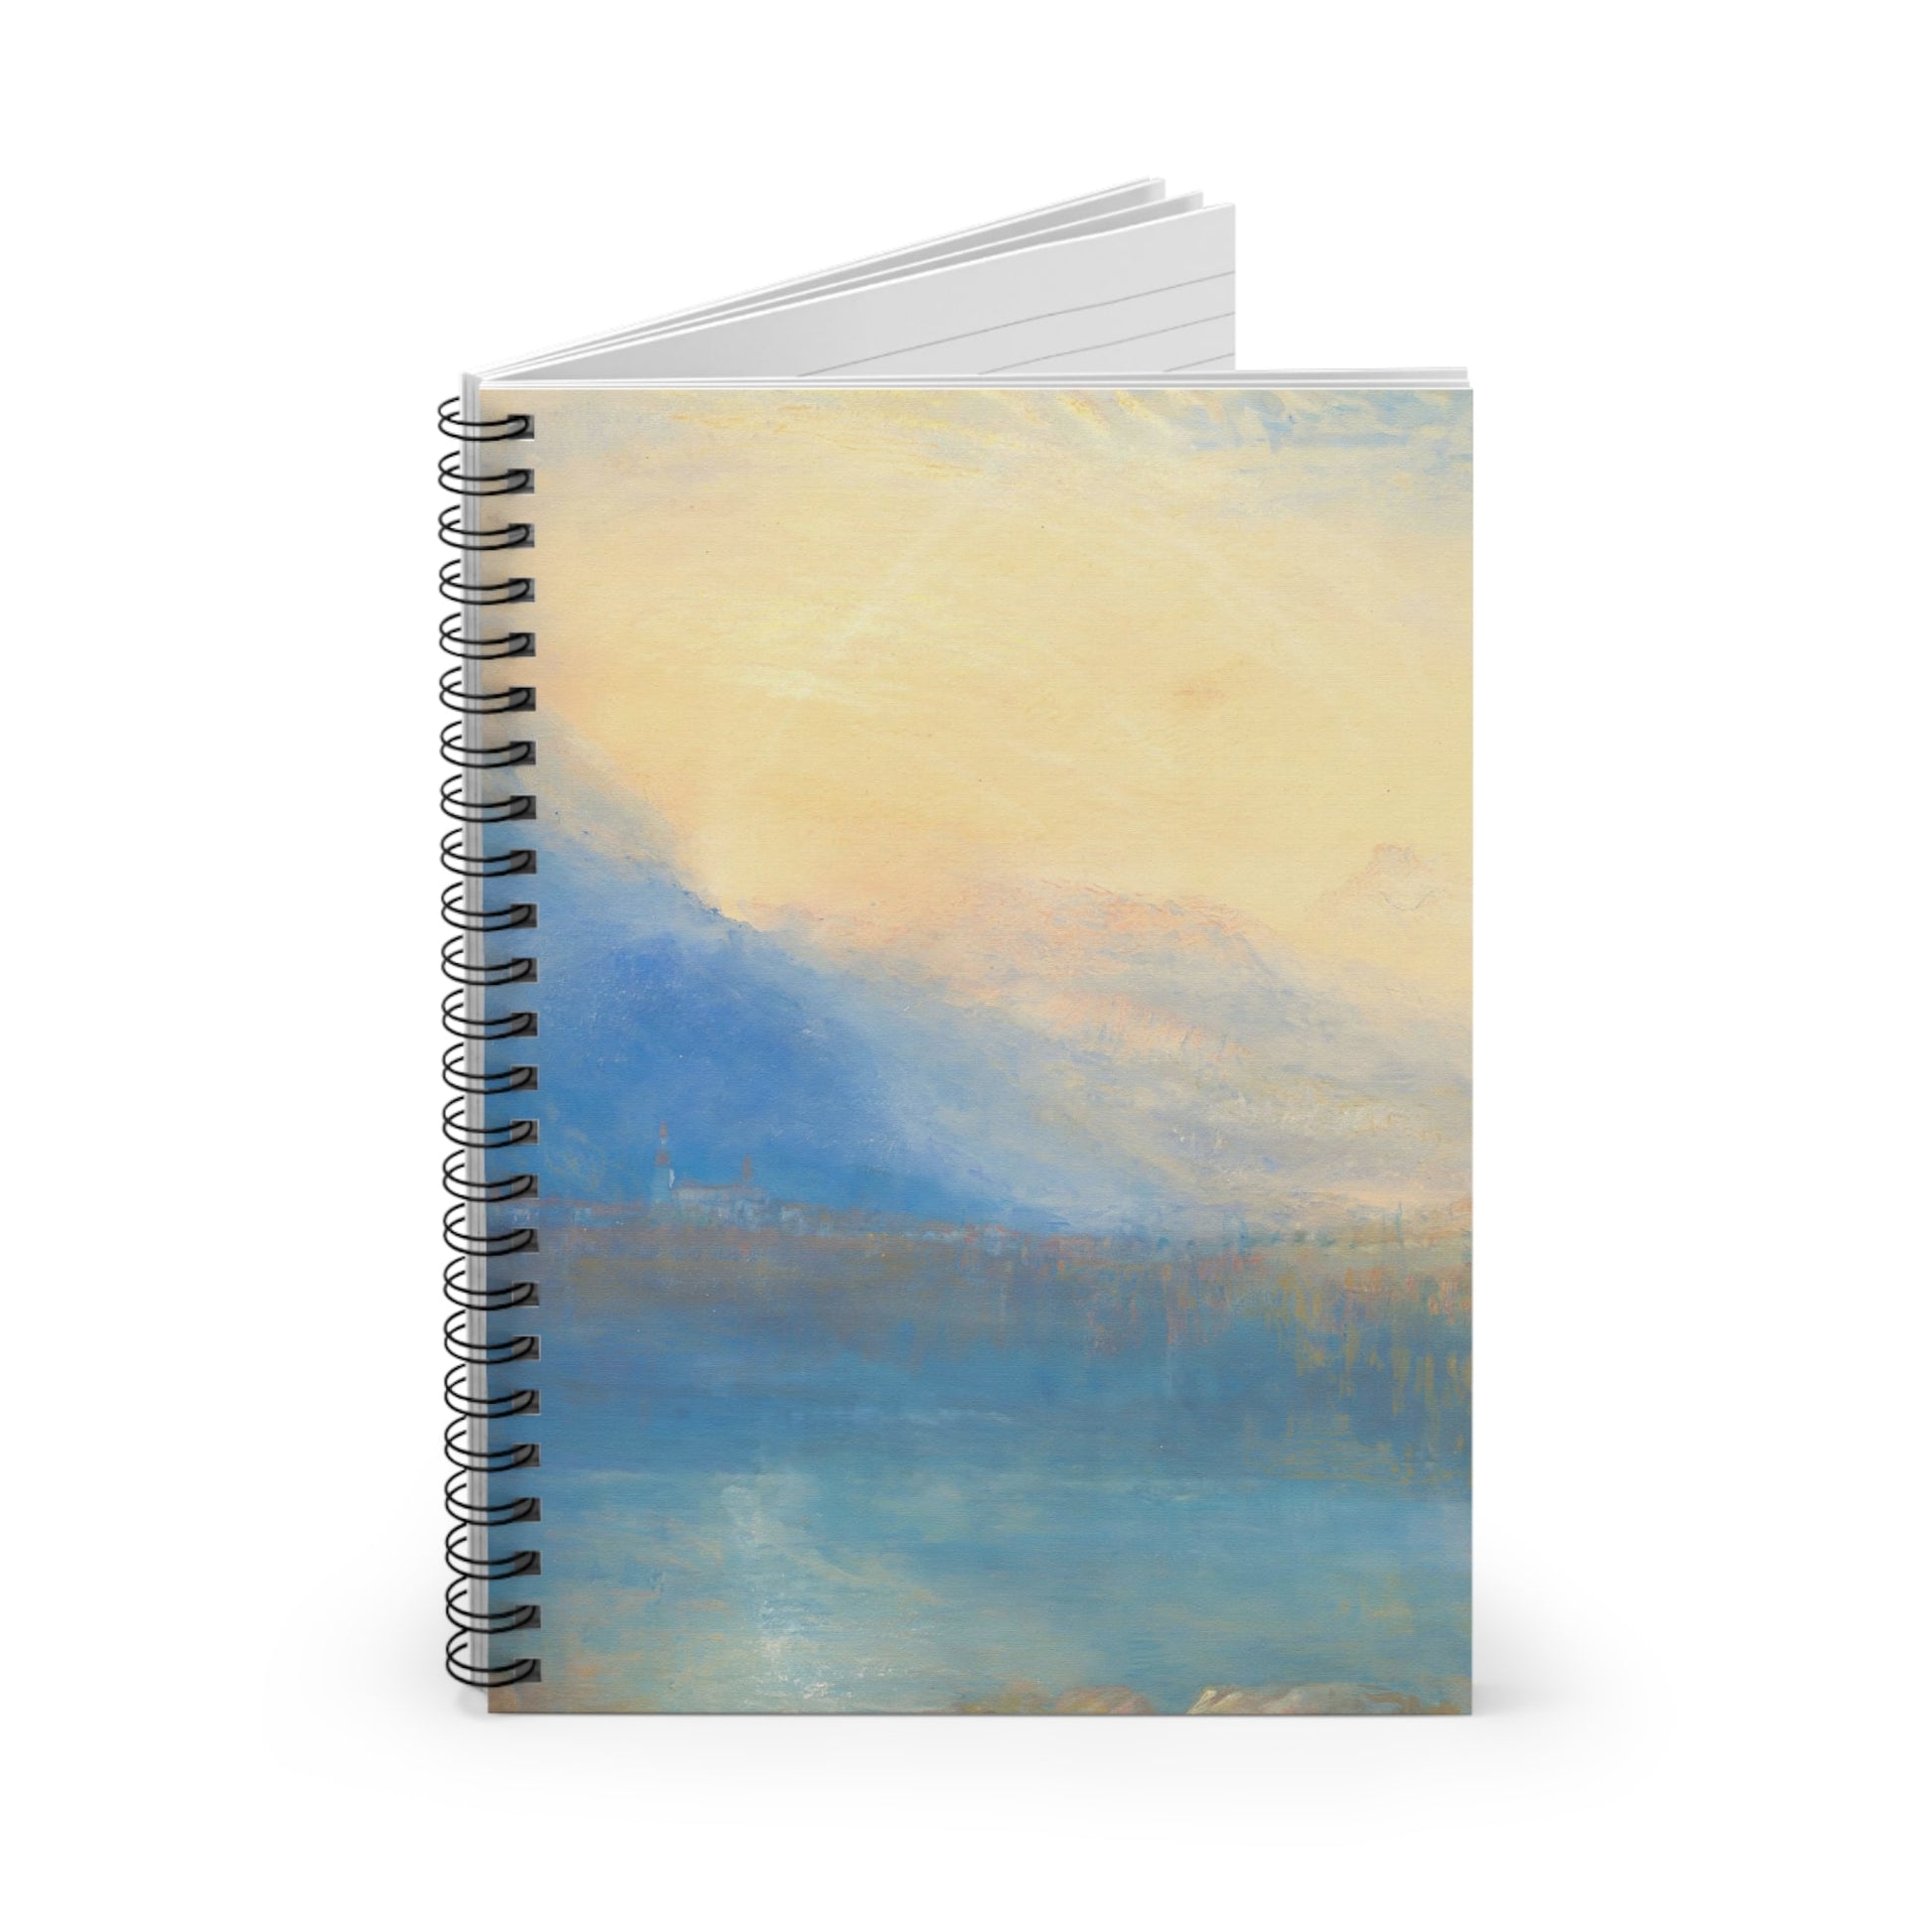 Mountain and Lake Spiral Notebook Standing up on White Desk